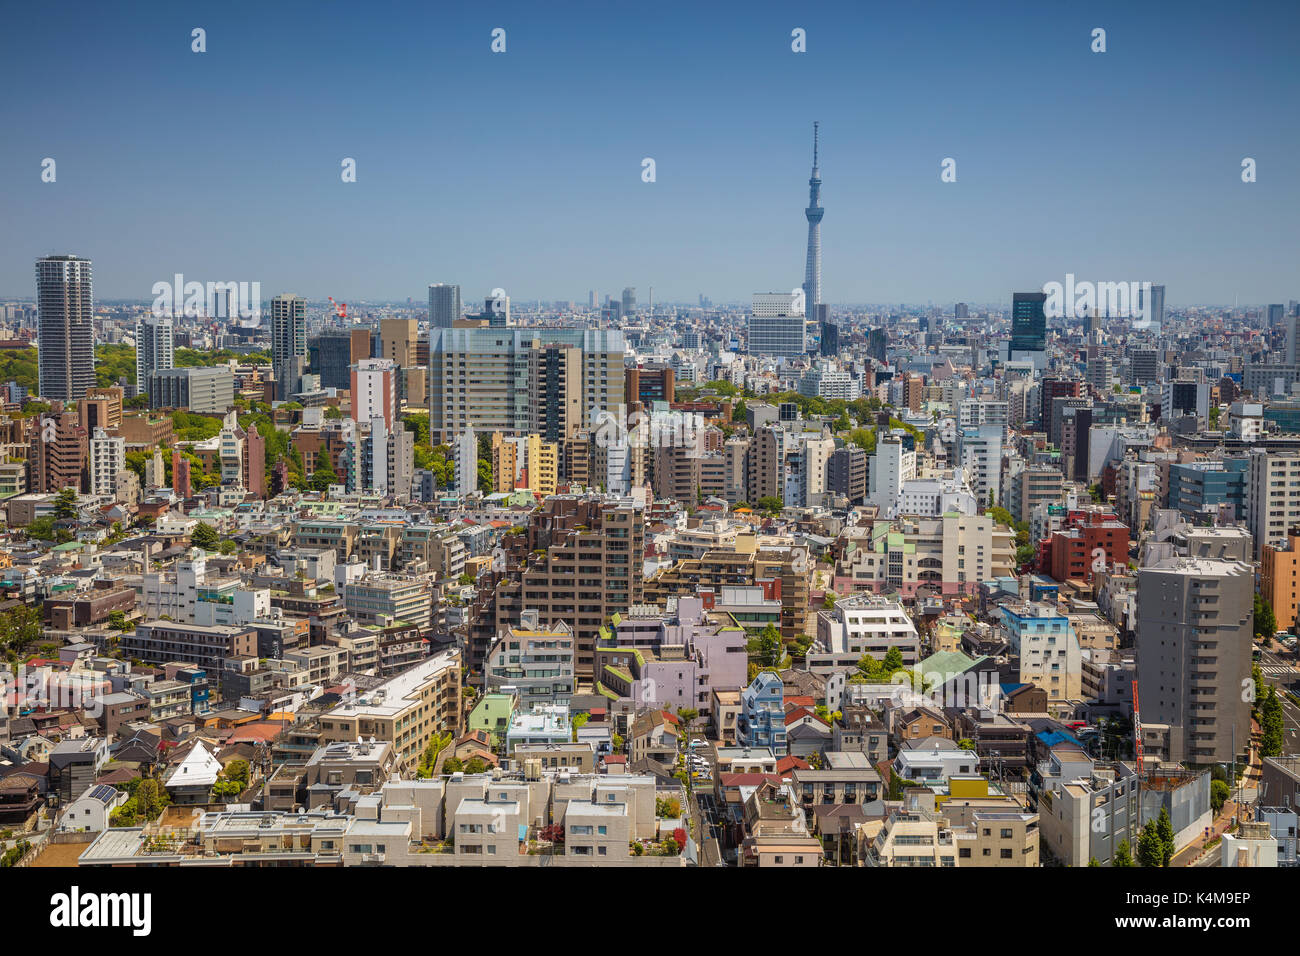 Tokyo. Cityscape image of Tokyo skyline during sunny day in Japan. Stock Photo